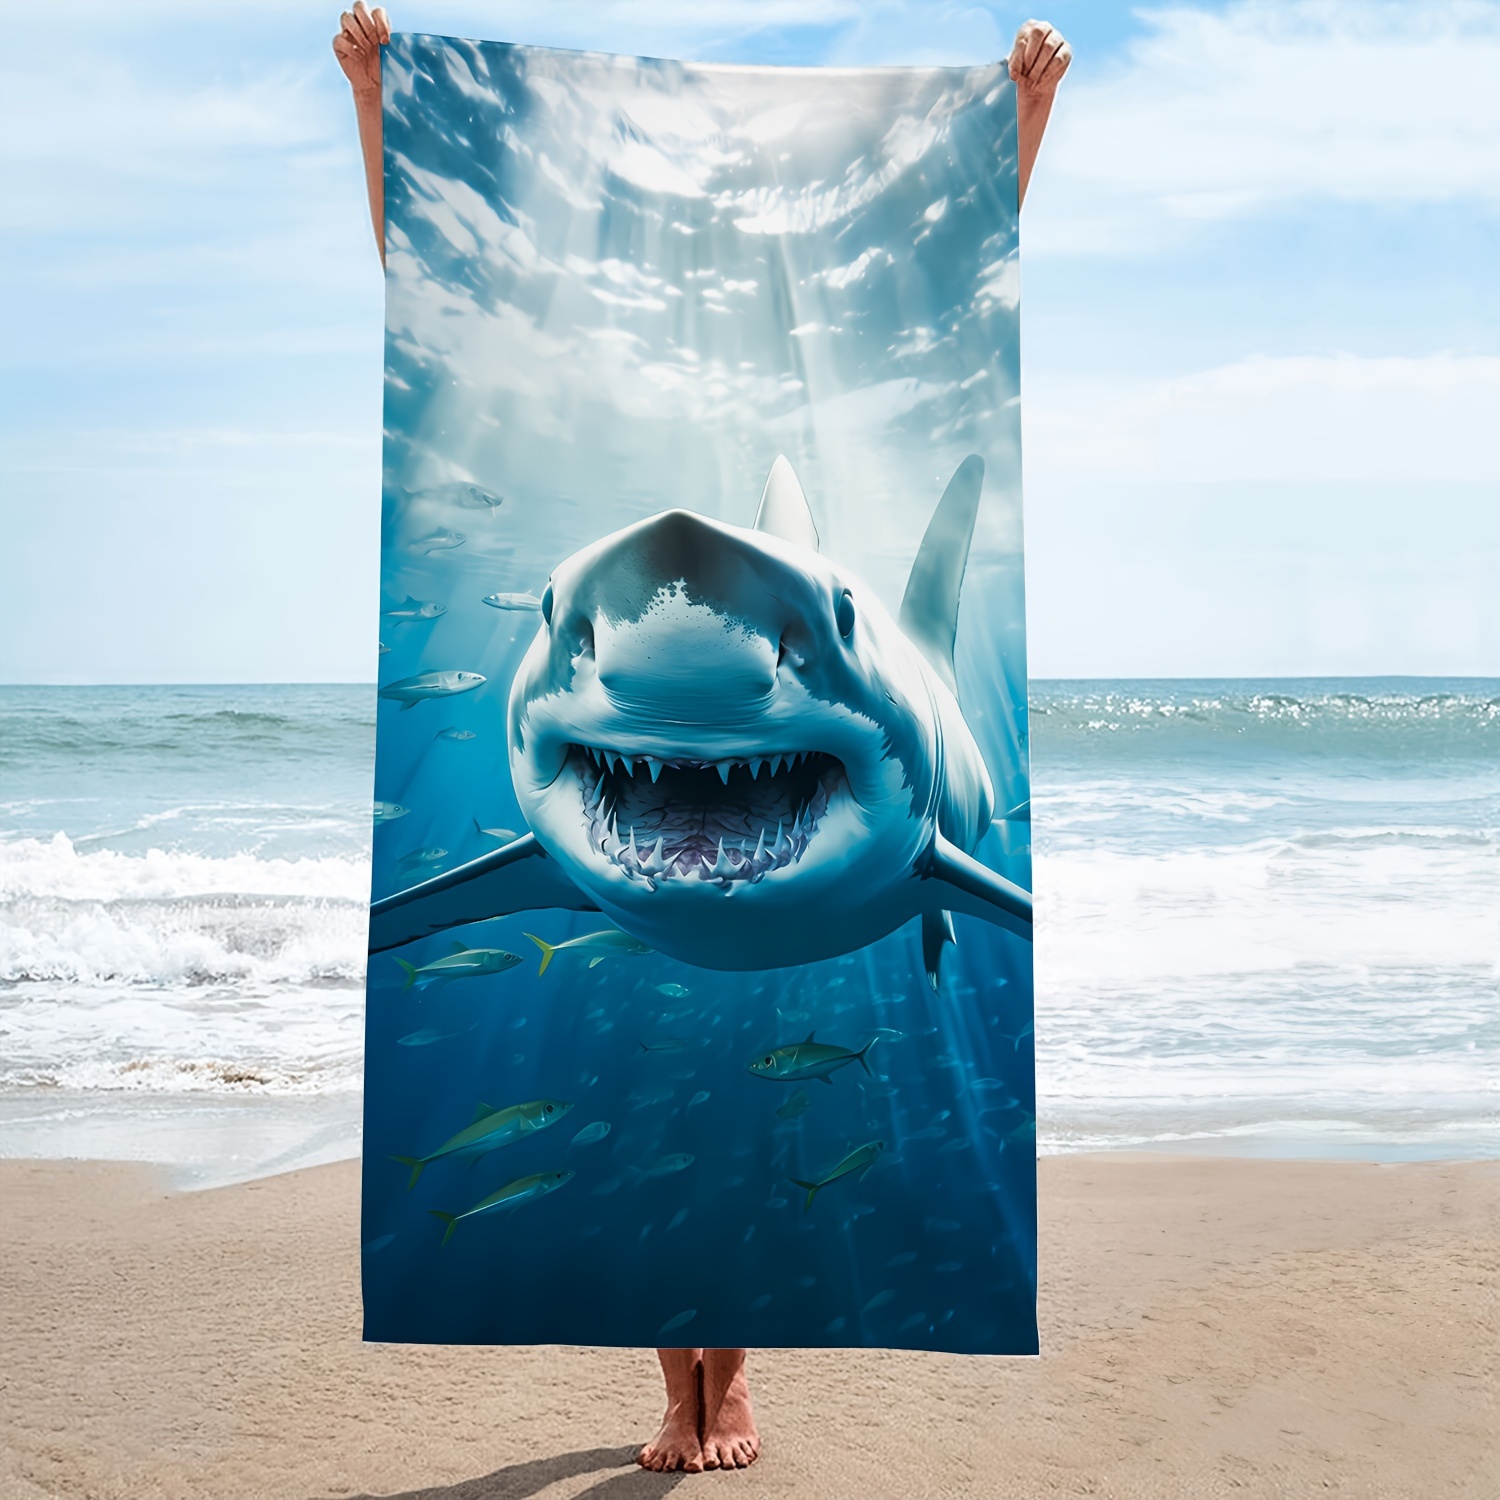 

1pc Shark Microfiber Beach Towel, Natural Ocean Oversized Beach Towel, Lightweight Sandproof Quick Drying Thin Absorbent Towel, Swimming Pool Camping Beach Accessory